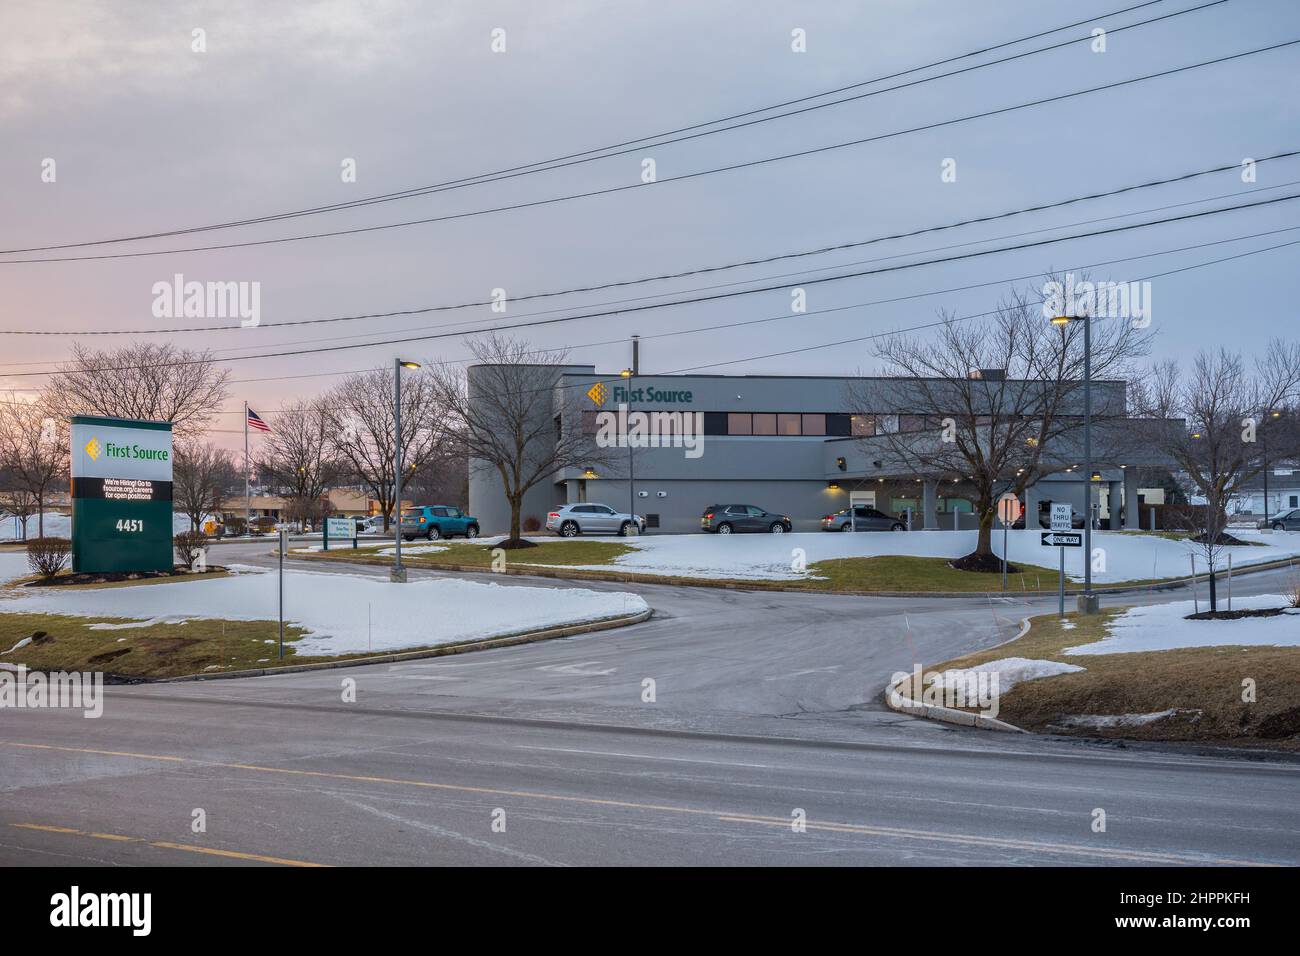 New Hartford - February 16, 2022: Wide View of First Source Bank HQ and ATM Drive-thru. Stock Photo